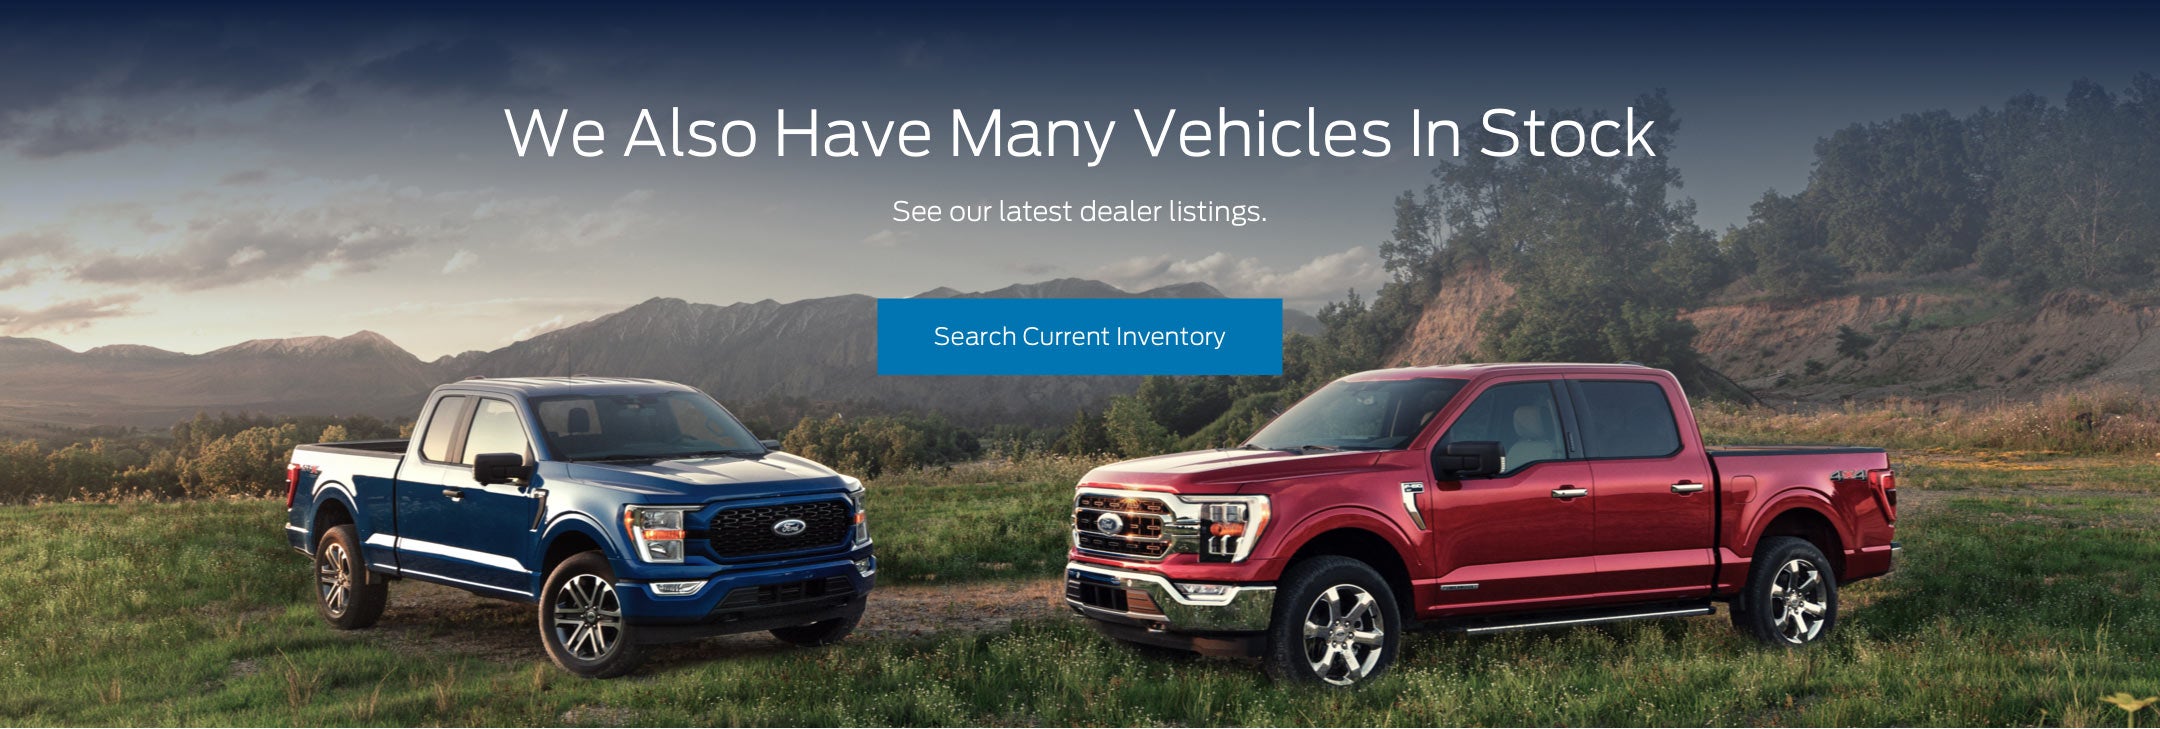 Ford vehicles in stock | Hutch Ford in West Liberty KY